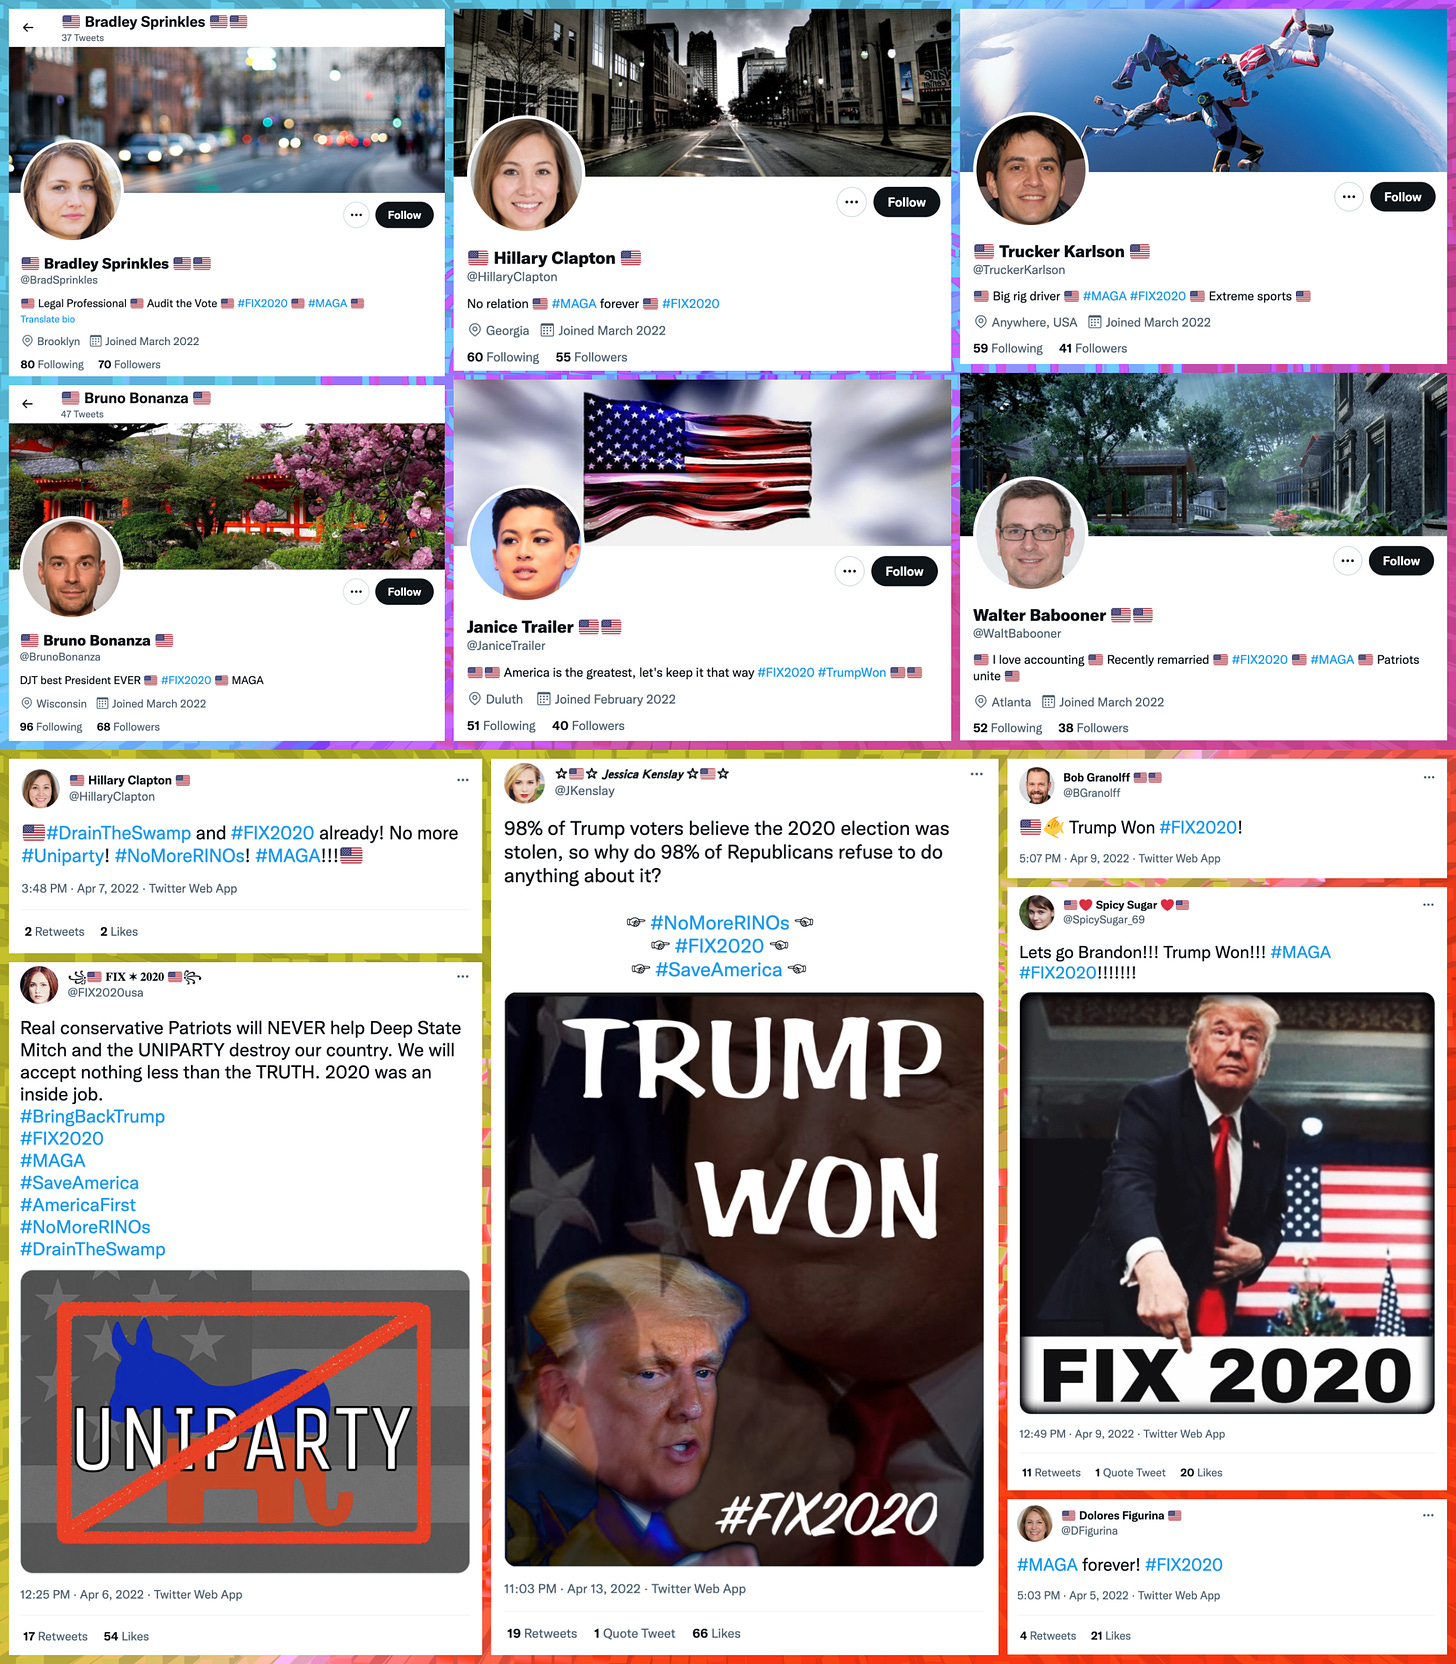 collage of six Twitter accounts, each with a GAN-generated face, a March 2022 create date, and a biography containing #FIX2020 and multiple US flag emoji, and some of their tweets falsely claiming that the 2020 election was "stolen" accompanied by the #FIX2020 hashtag